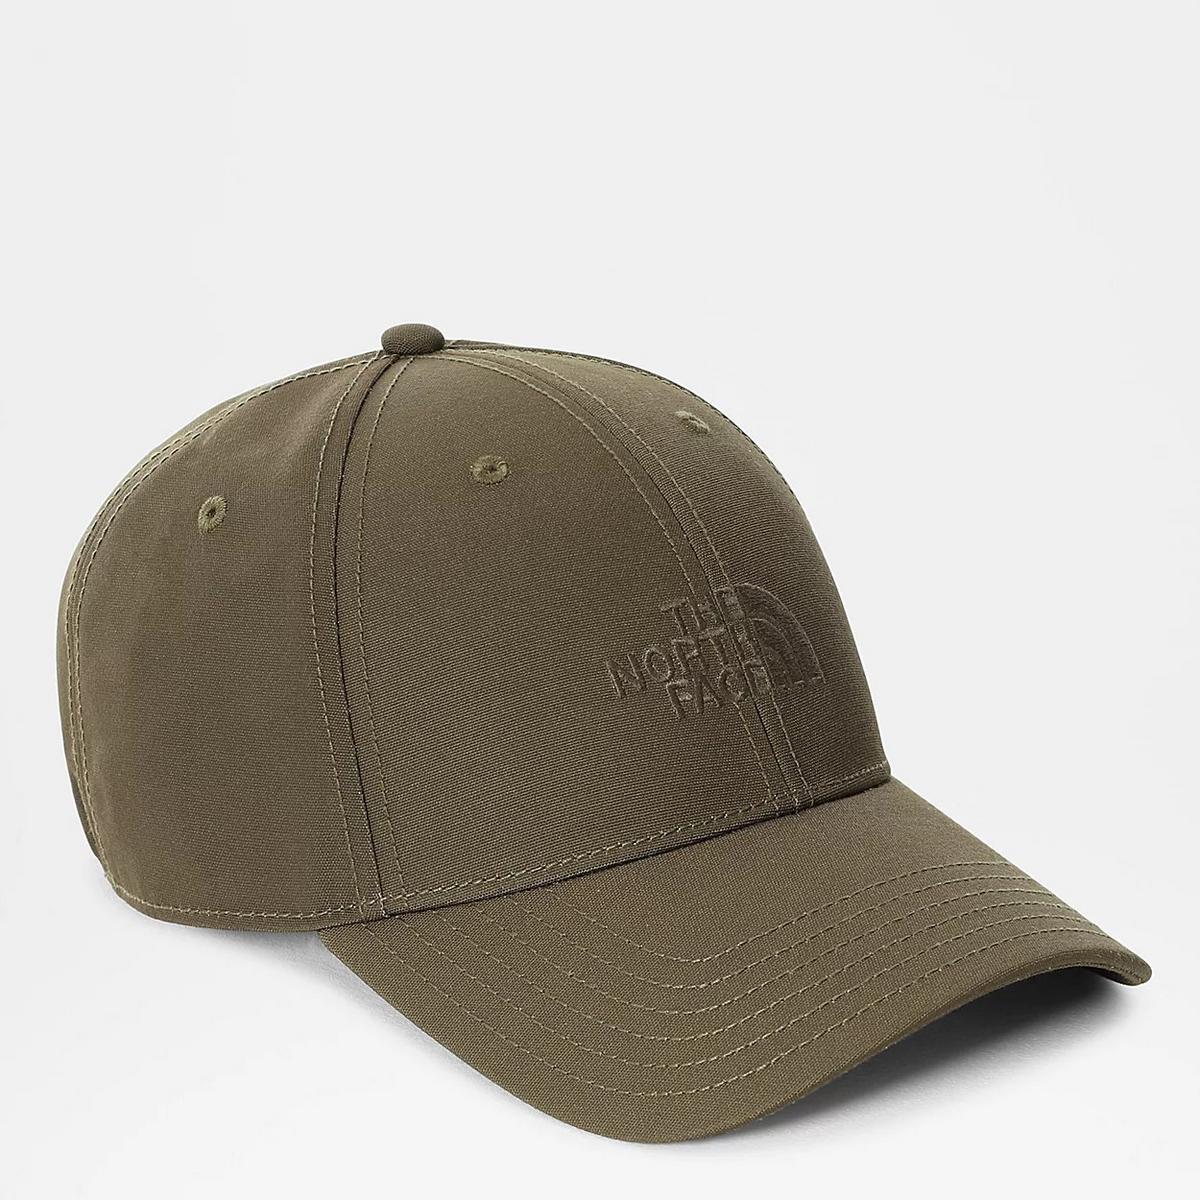 The North Face Unisex '66 Classic Hat - Military Olive